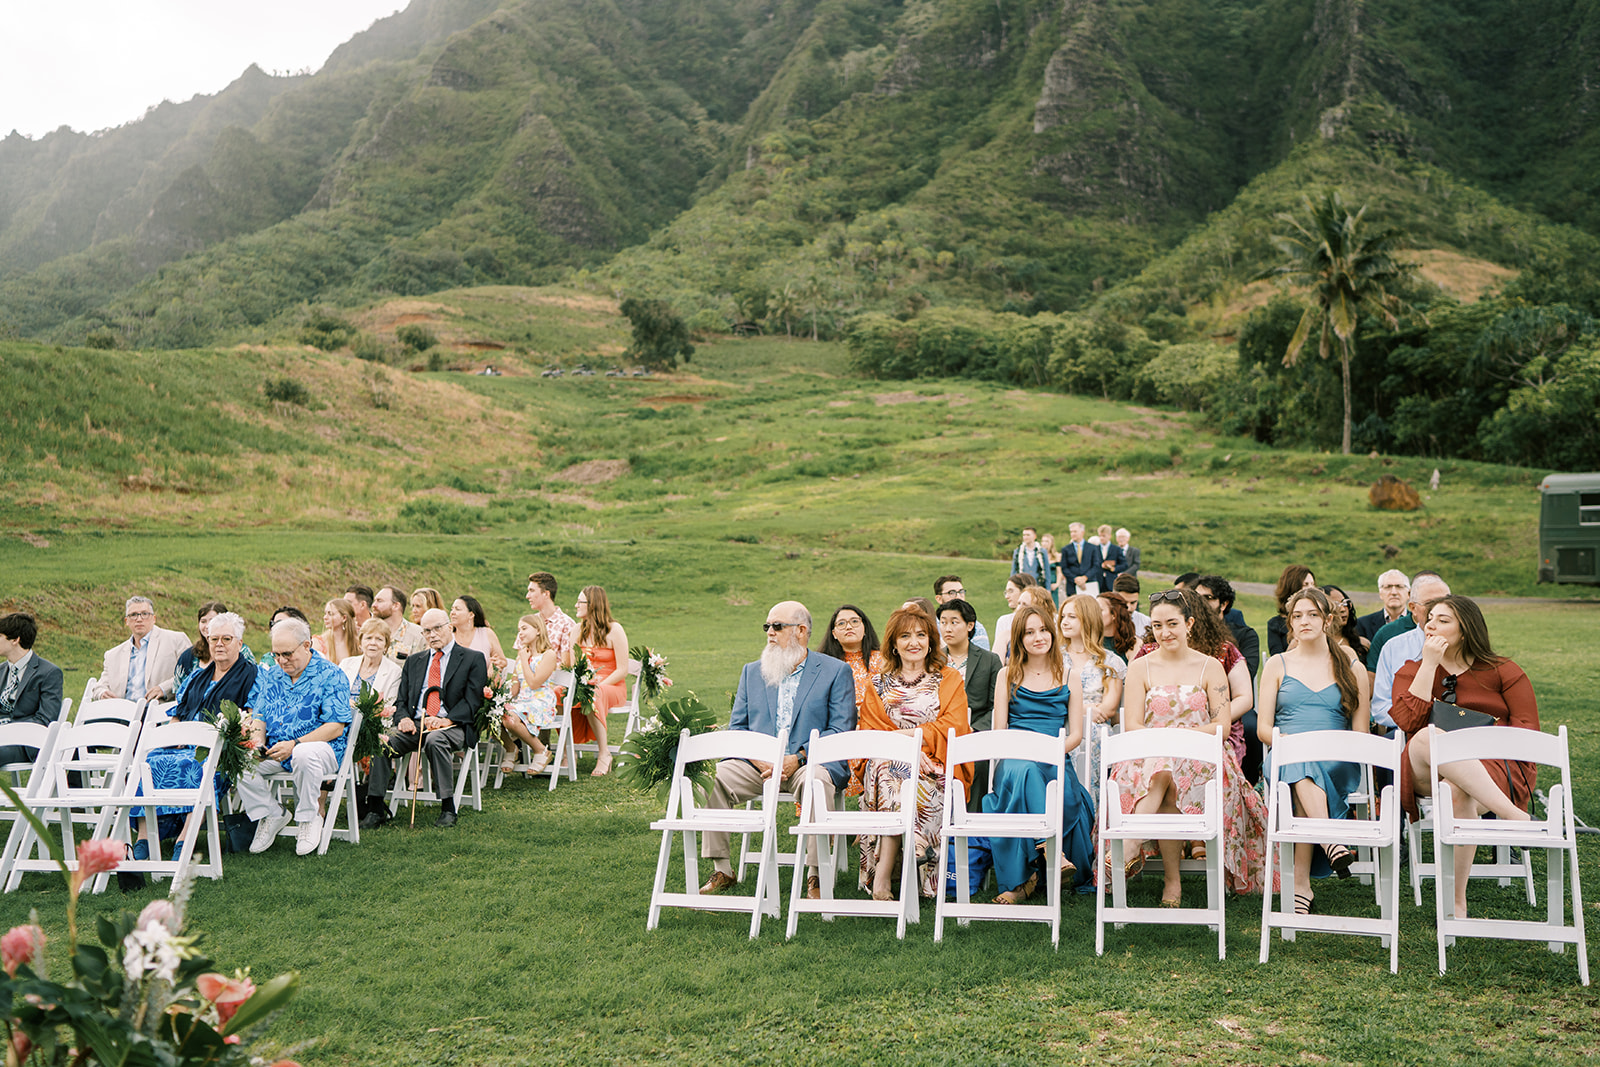 Hawaiian wedding ceremony in a field with mountains in the background.